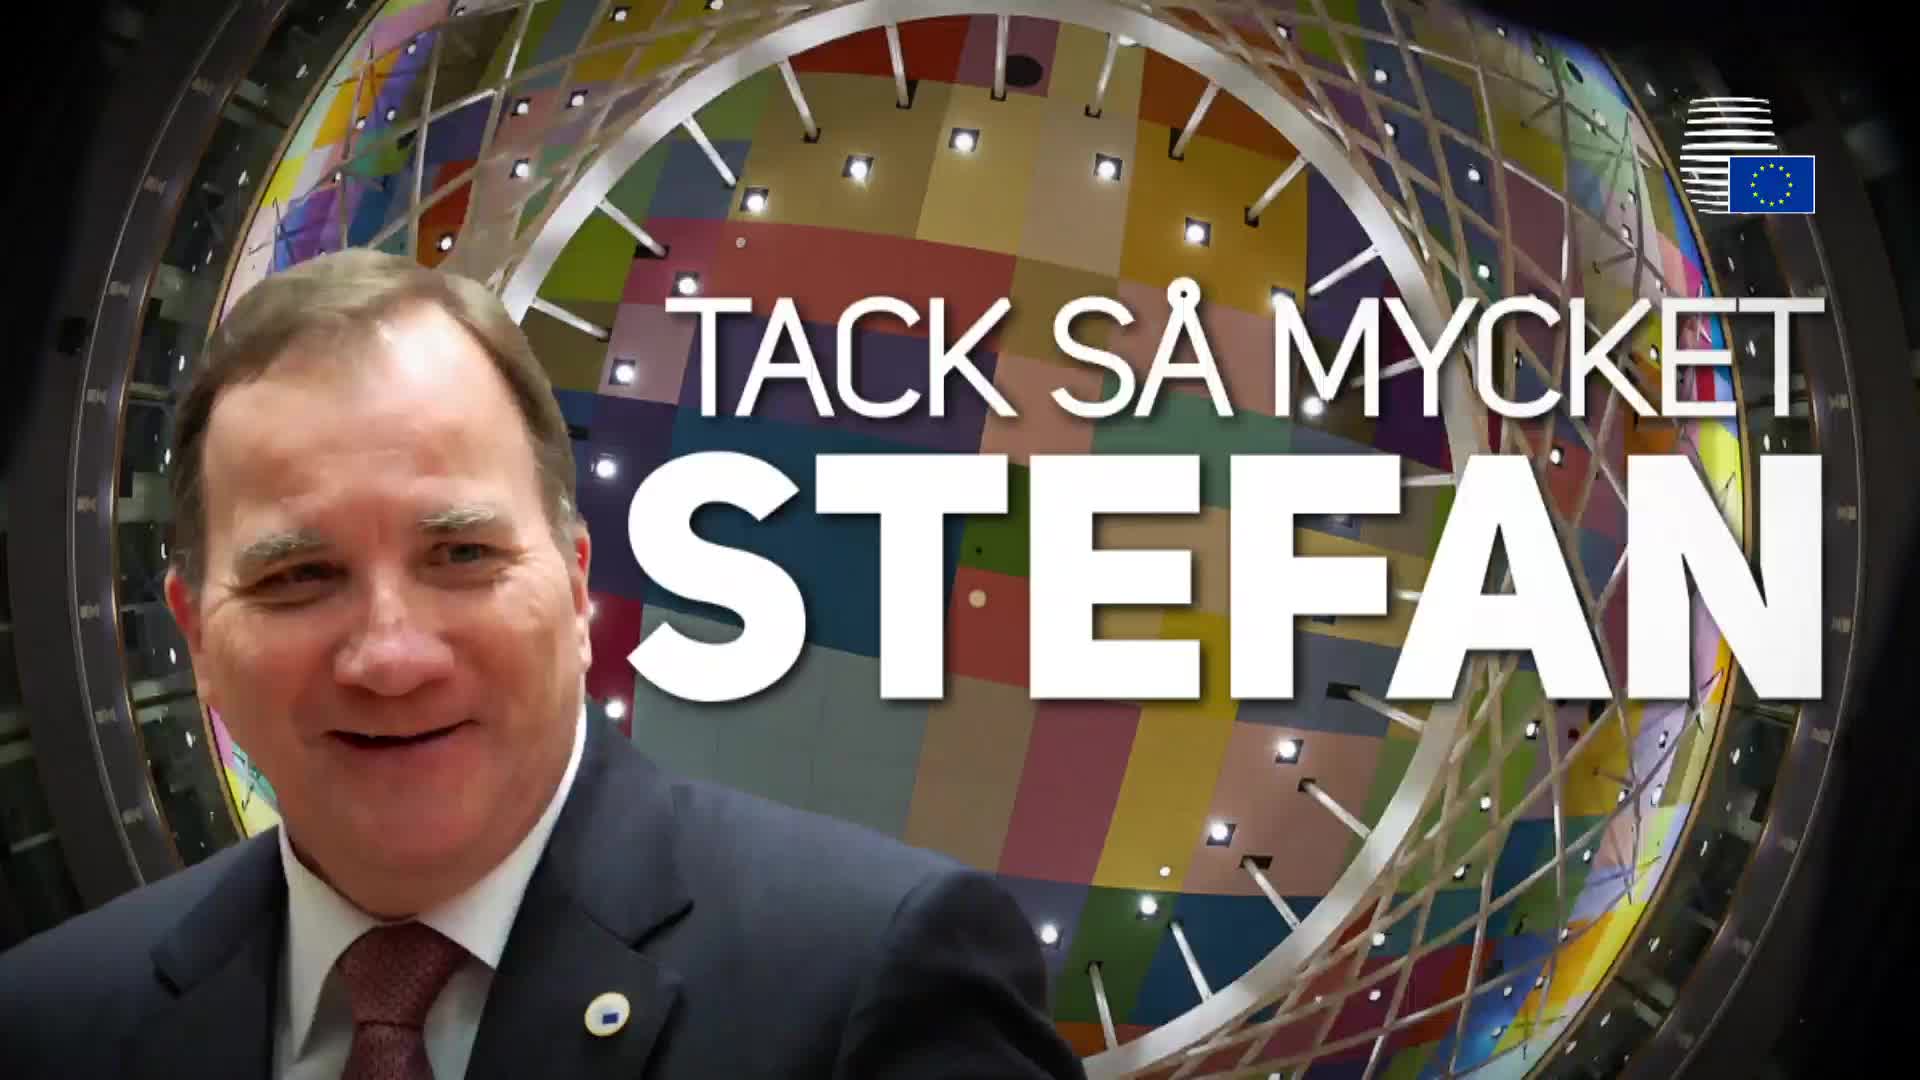 Video: This video pays tribute to Swedish Prime Minister Stefan Löfven and looks back on his contribution to the European Council.